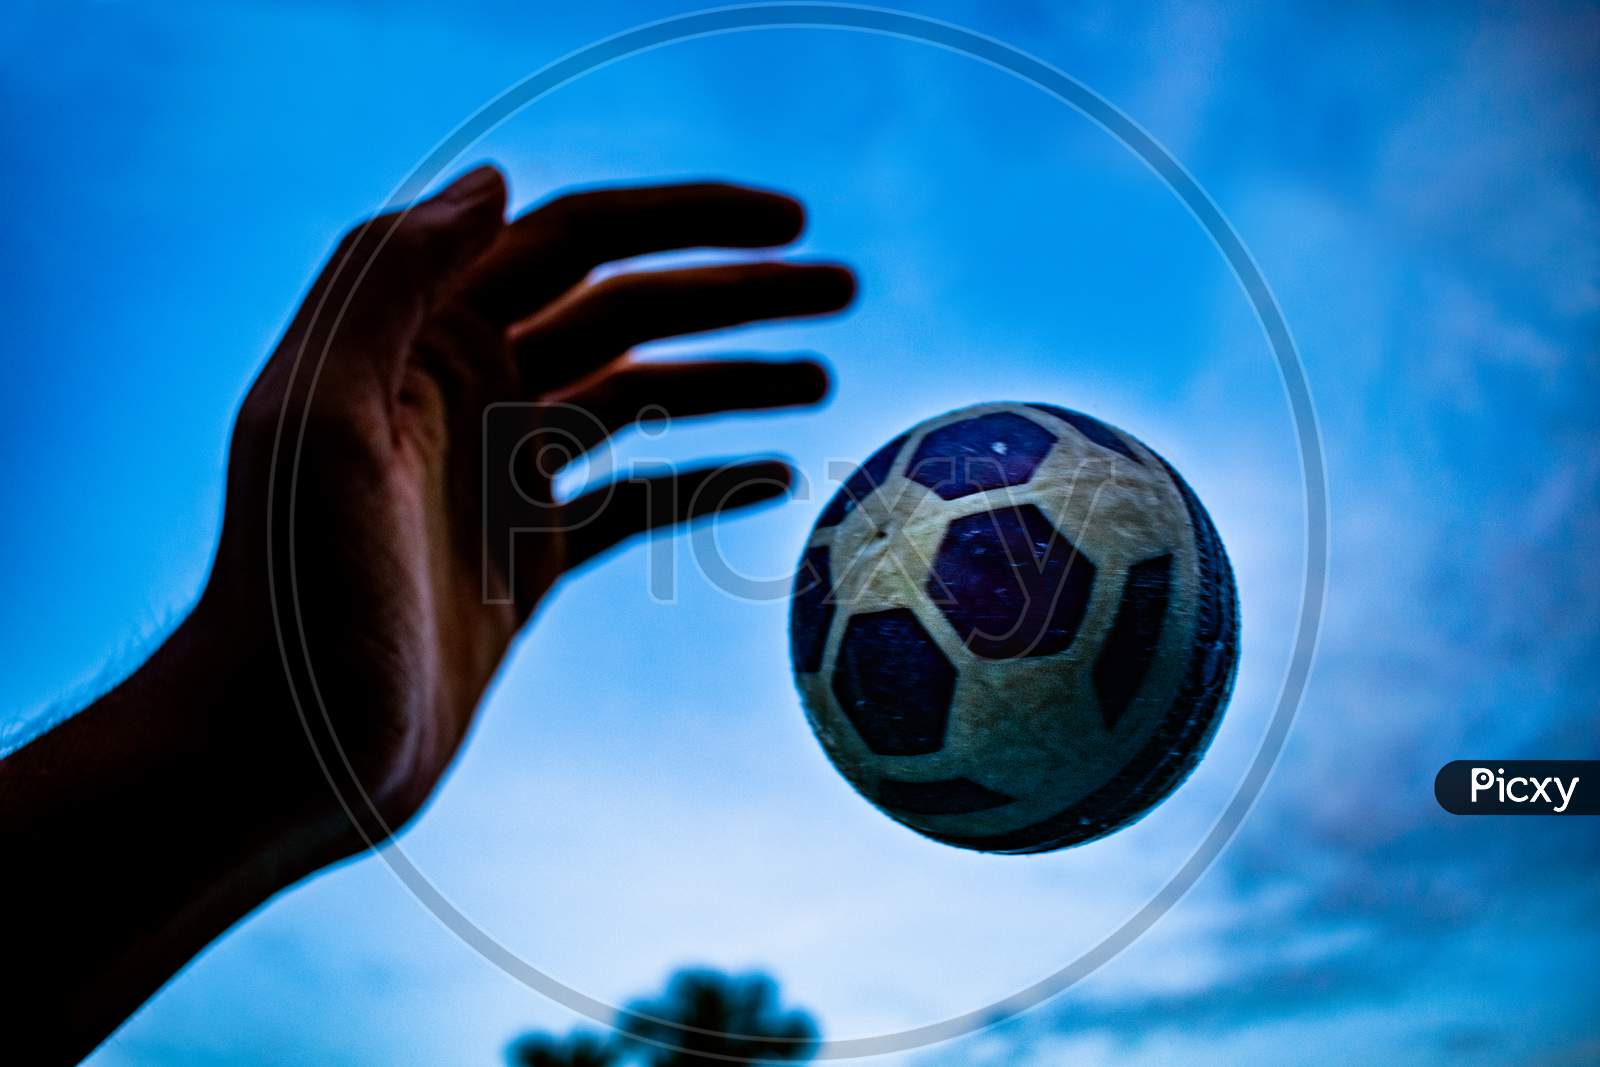 A Man Throwing Ball By Hand Against The Clear Blue Sky With White Clouds. Close up macro shot of plastic cricket ball float in air on blur nature background. Creative Photography, Copy Space For Text.